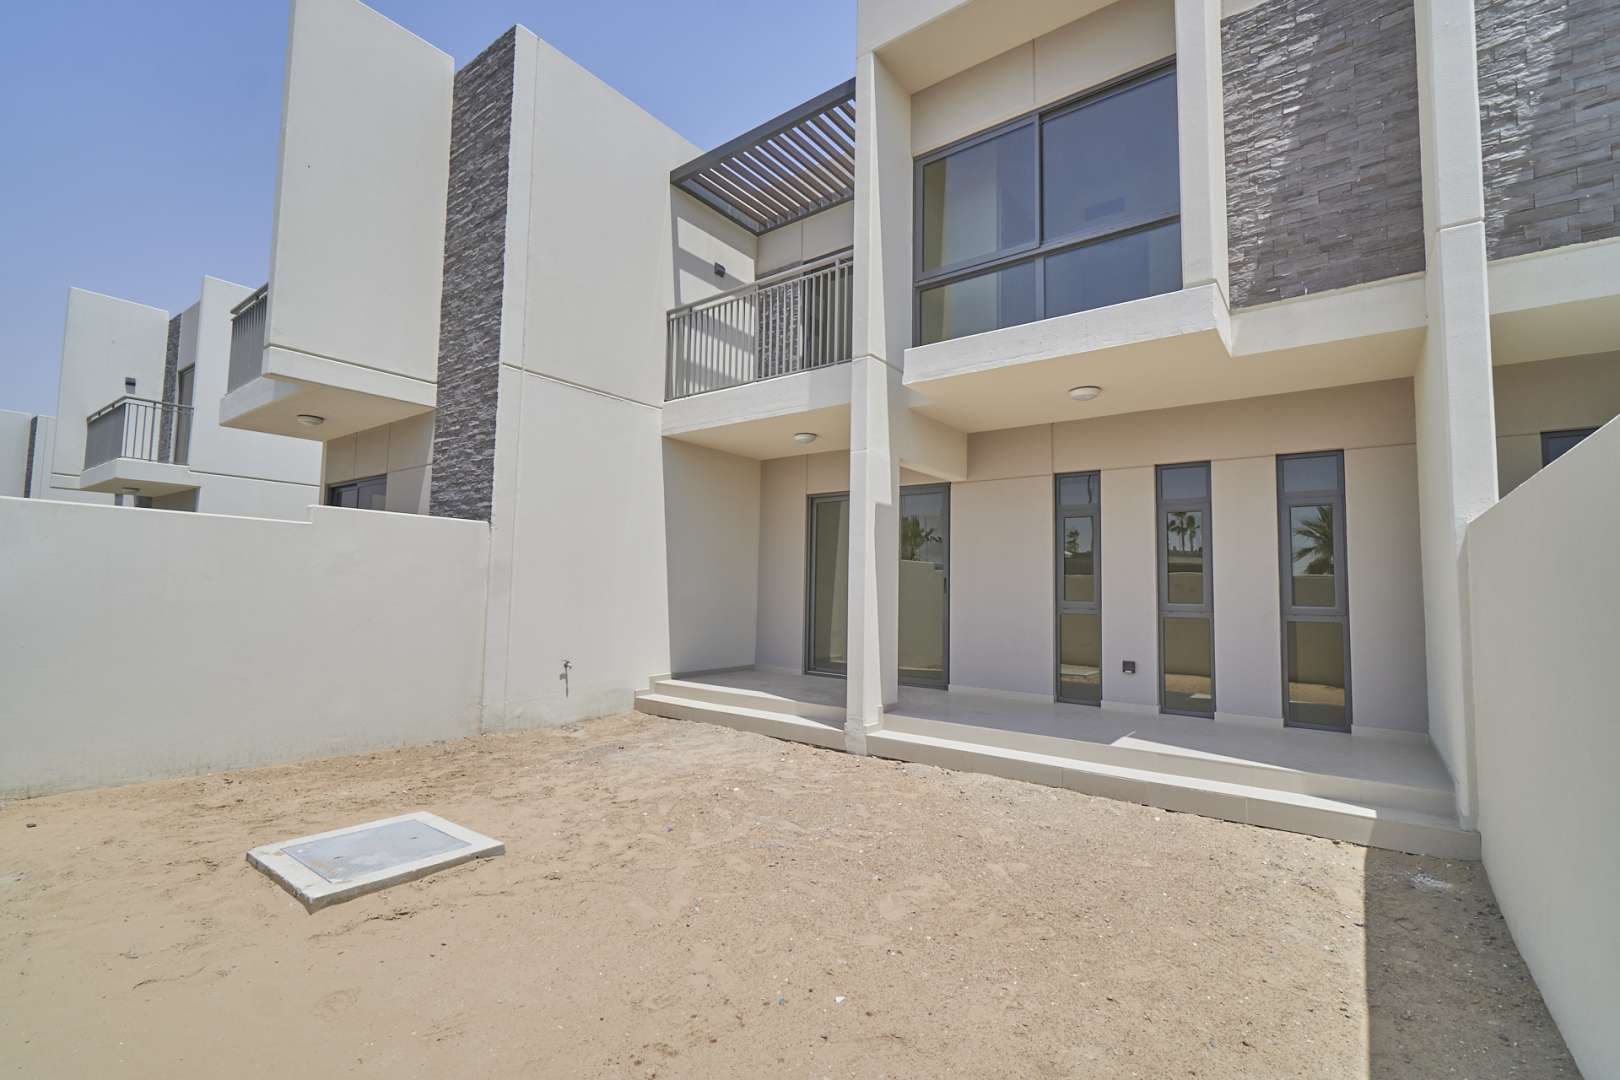 3 Bedroom Townhouse For Rent Aster Lp08510 2aa5a75880365200.jpg